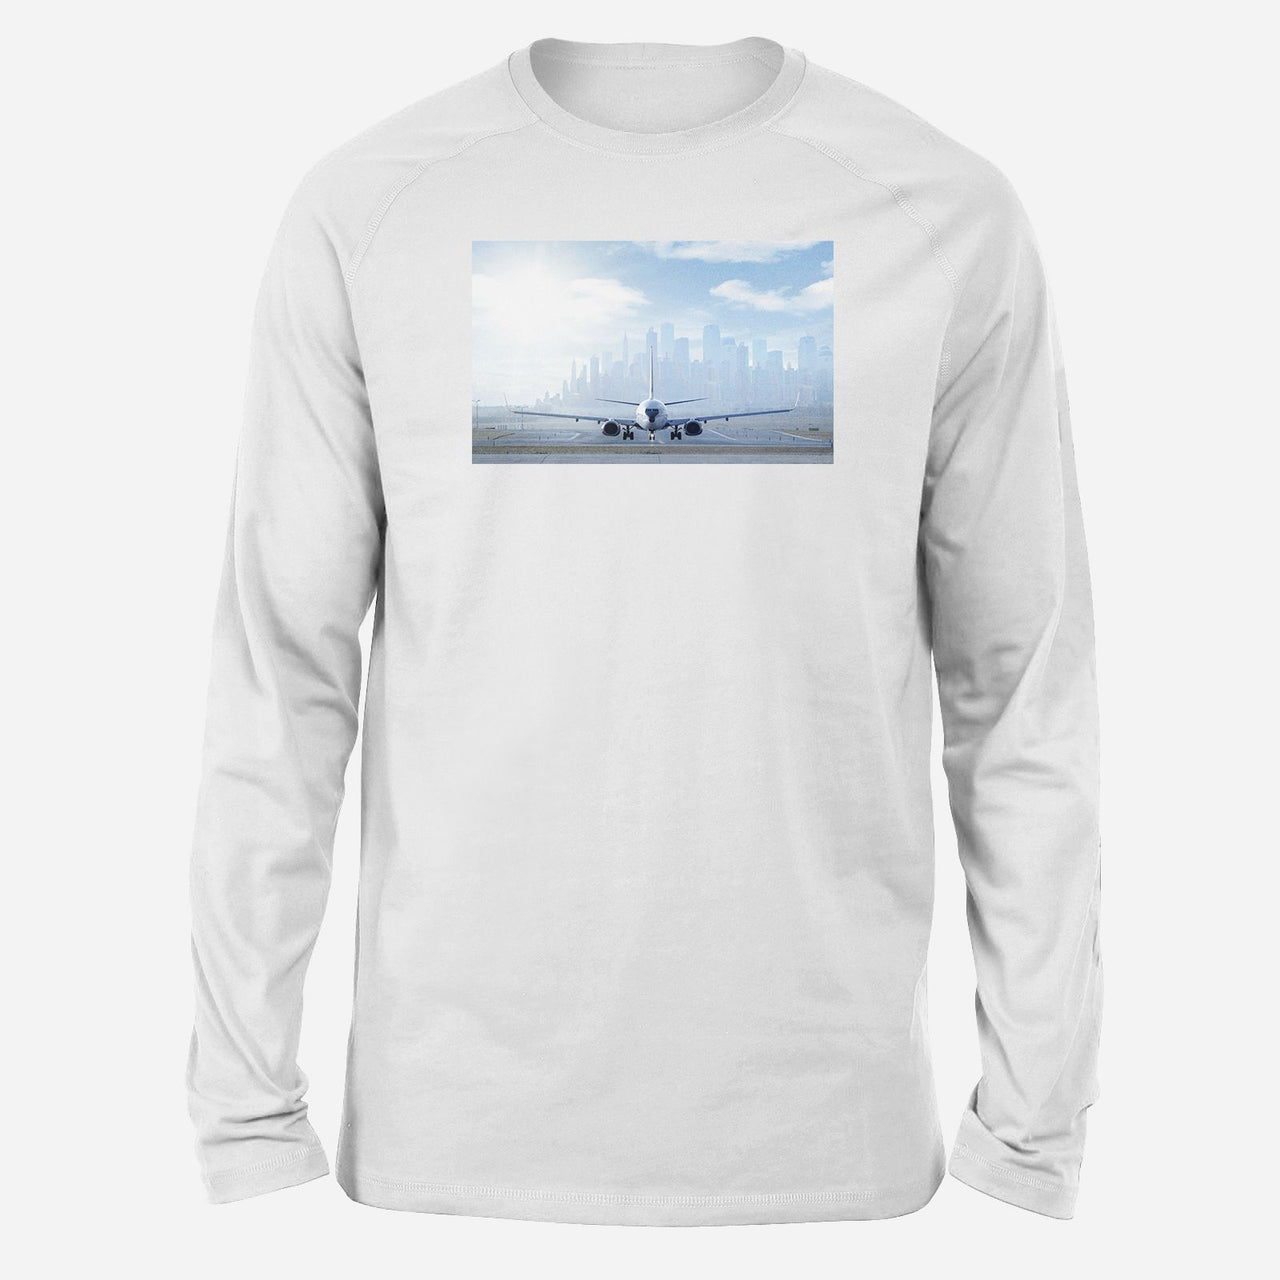 Boeing 737 & City View Behind Designed Long-Sleeve T-Shirts